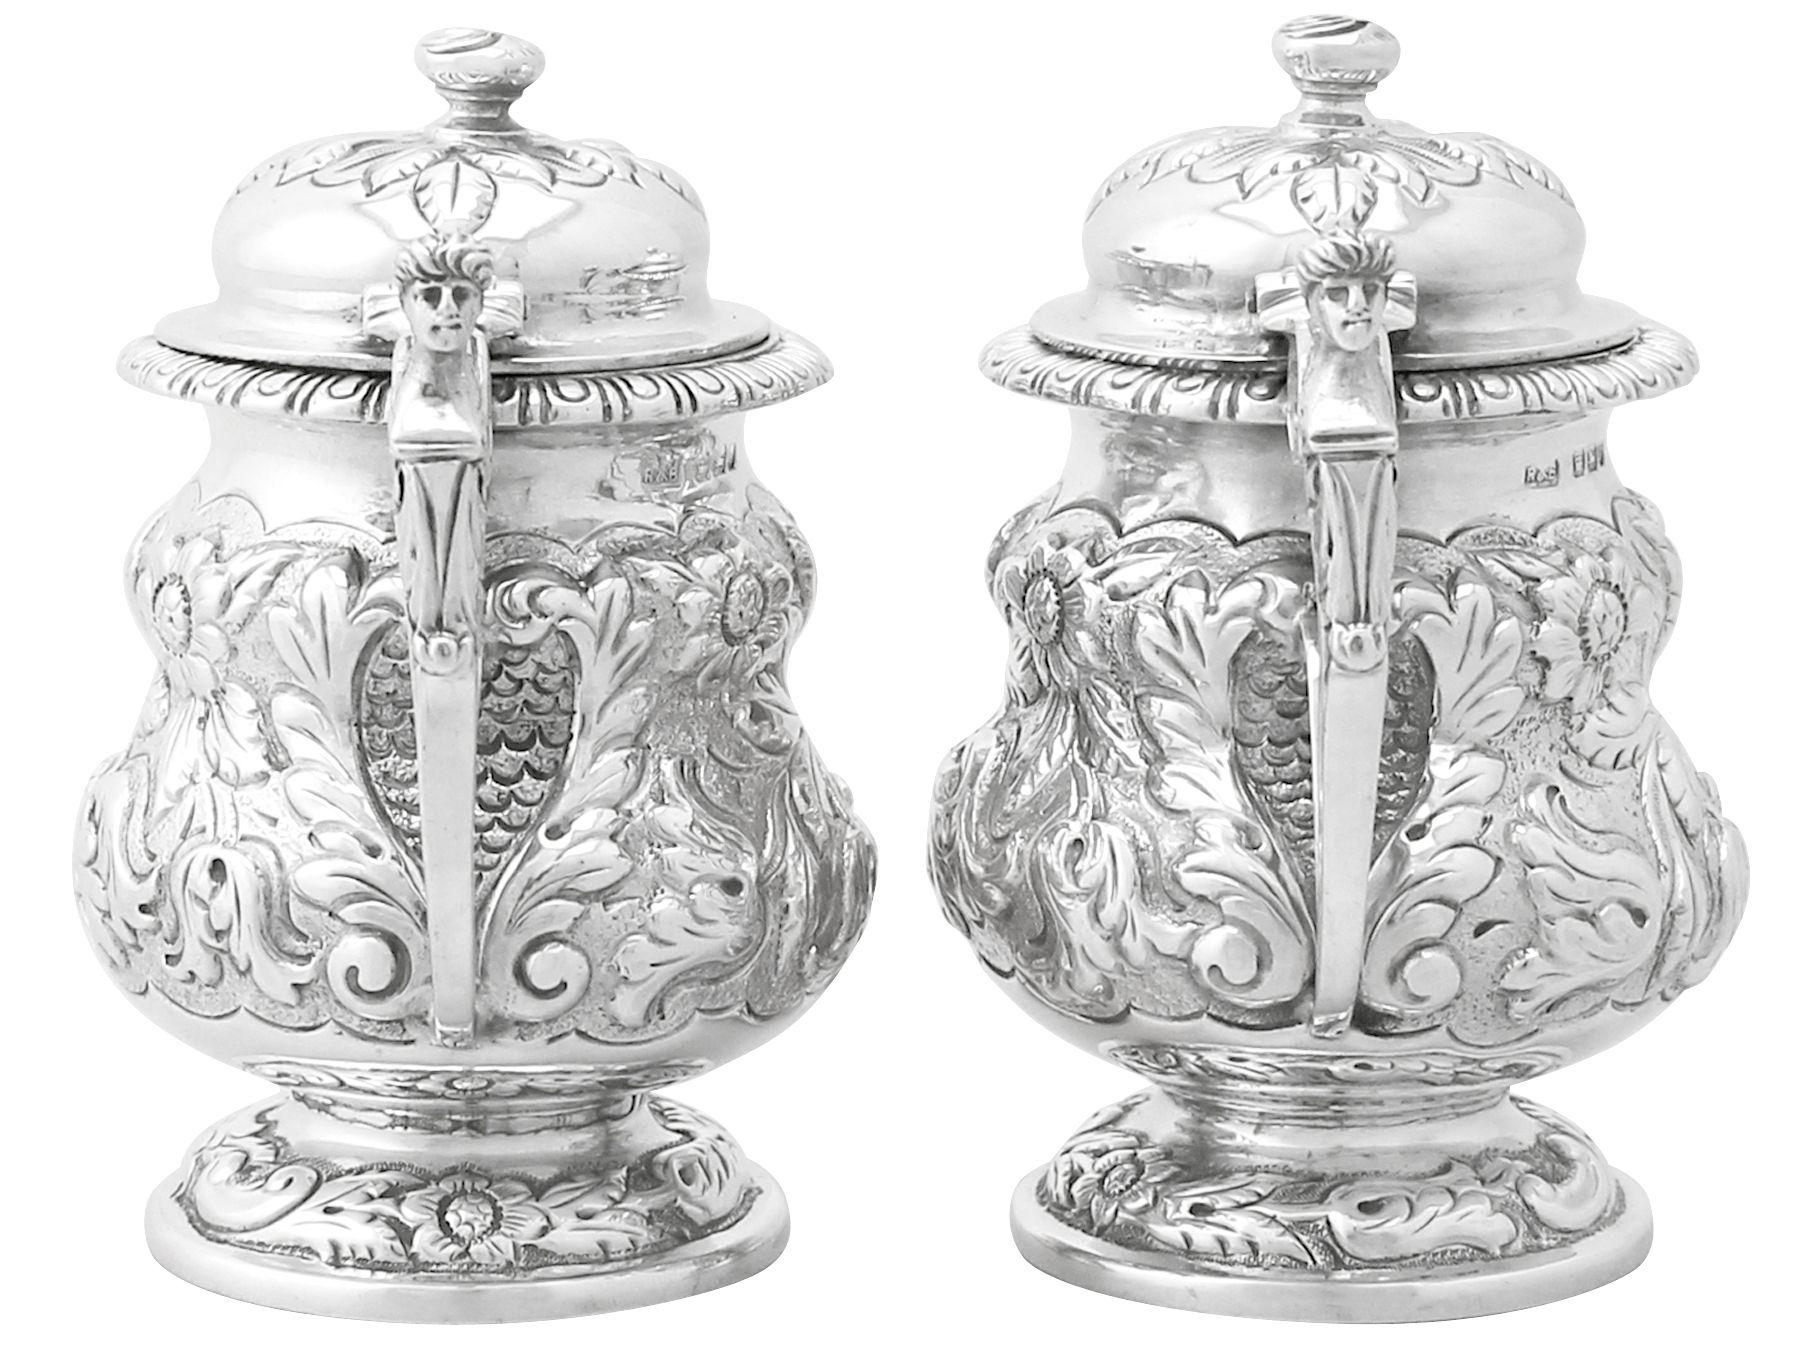 Roberts & Belk Ltd Antique Pair of English Sterling Silver Mustard Pots In Excellent Condition For Sale In Jesmond, Newcastle Upon Tyne